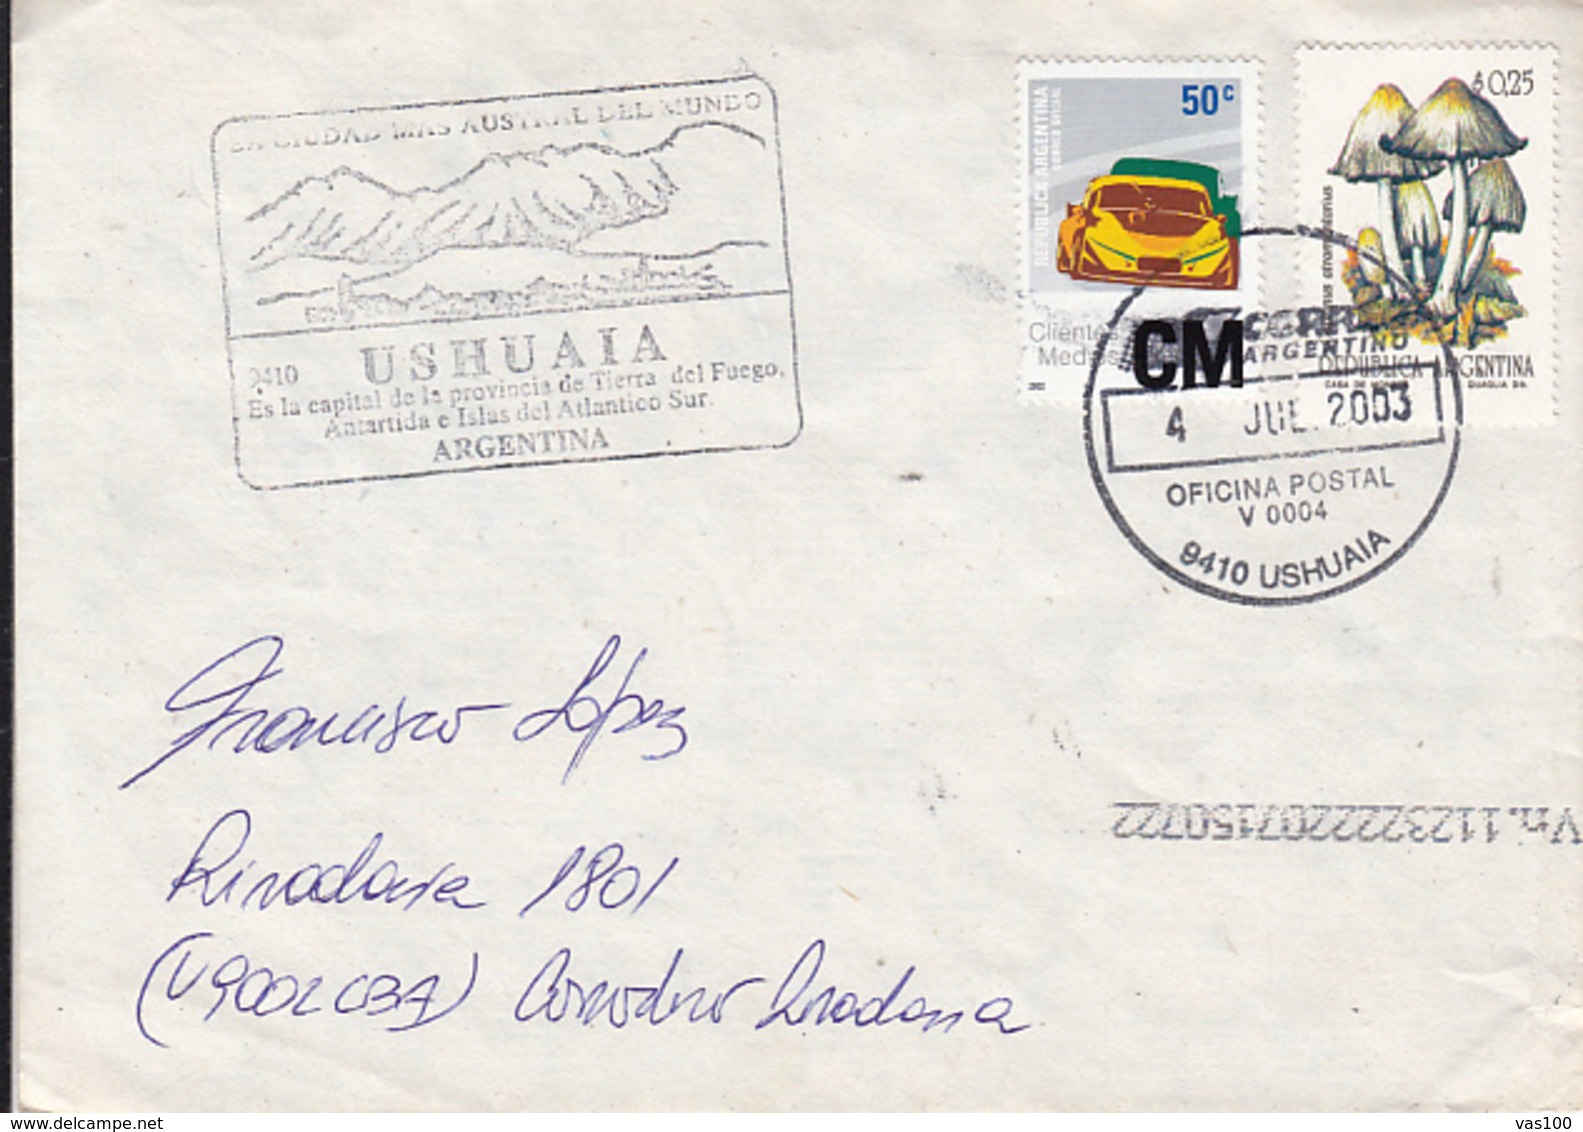 USHUAIA- TIERRA DEL FUEGO SPECIAL POSTMARK, CAR,MUSHROOMS, STAMPS ON COVER, 2003, ARGENTINA - Lettres & Documents